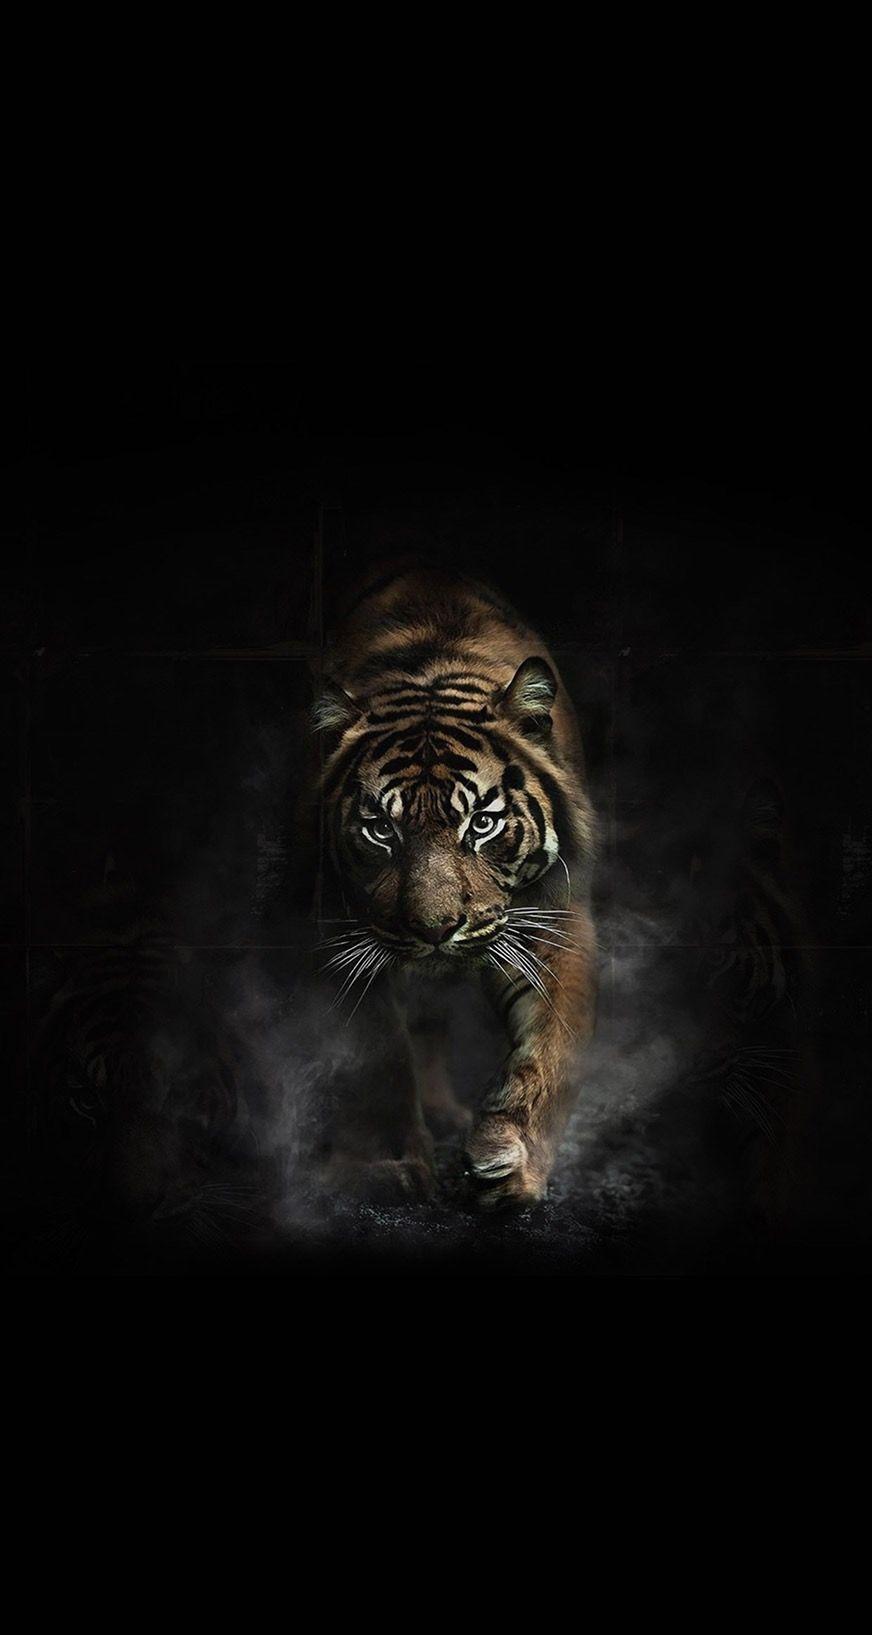 75 tiger wallpaper HD for mobile  Android  iPhone HD Wallpaper  Background Download png  jpg 2023